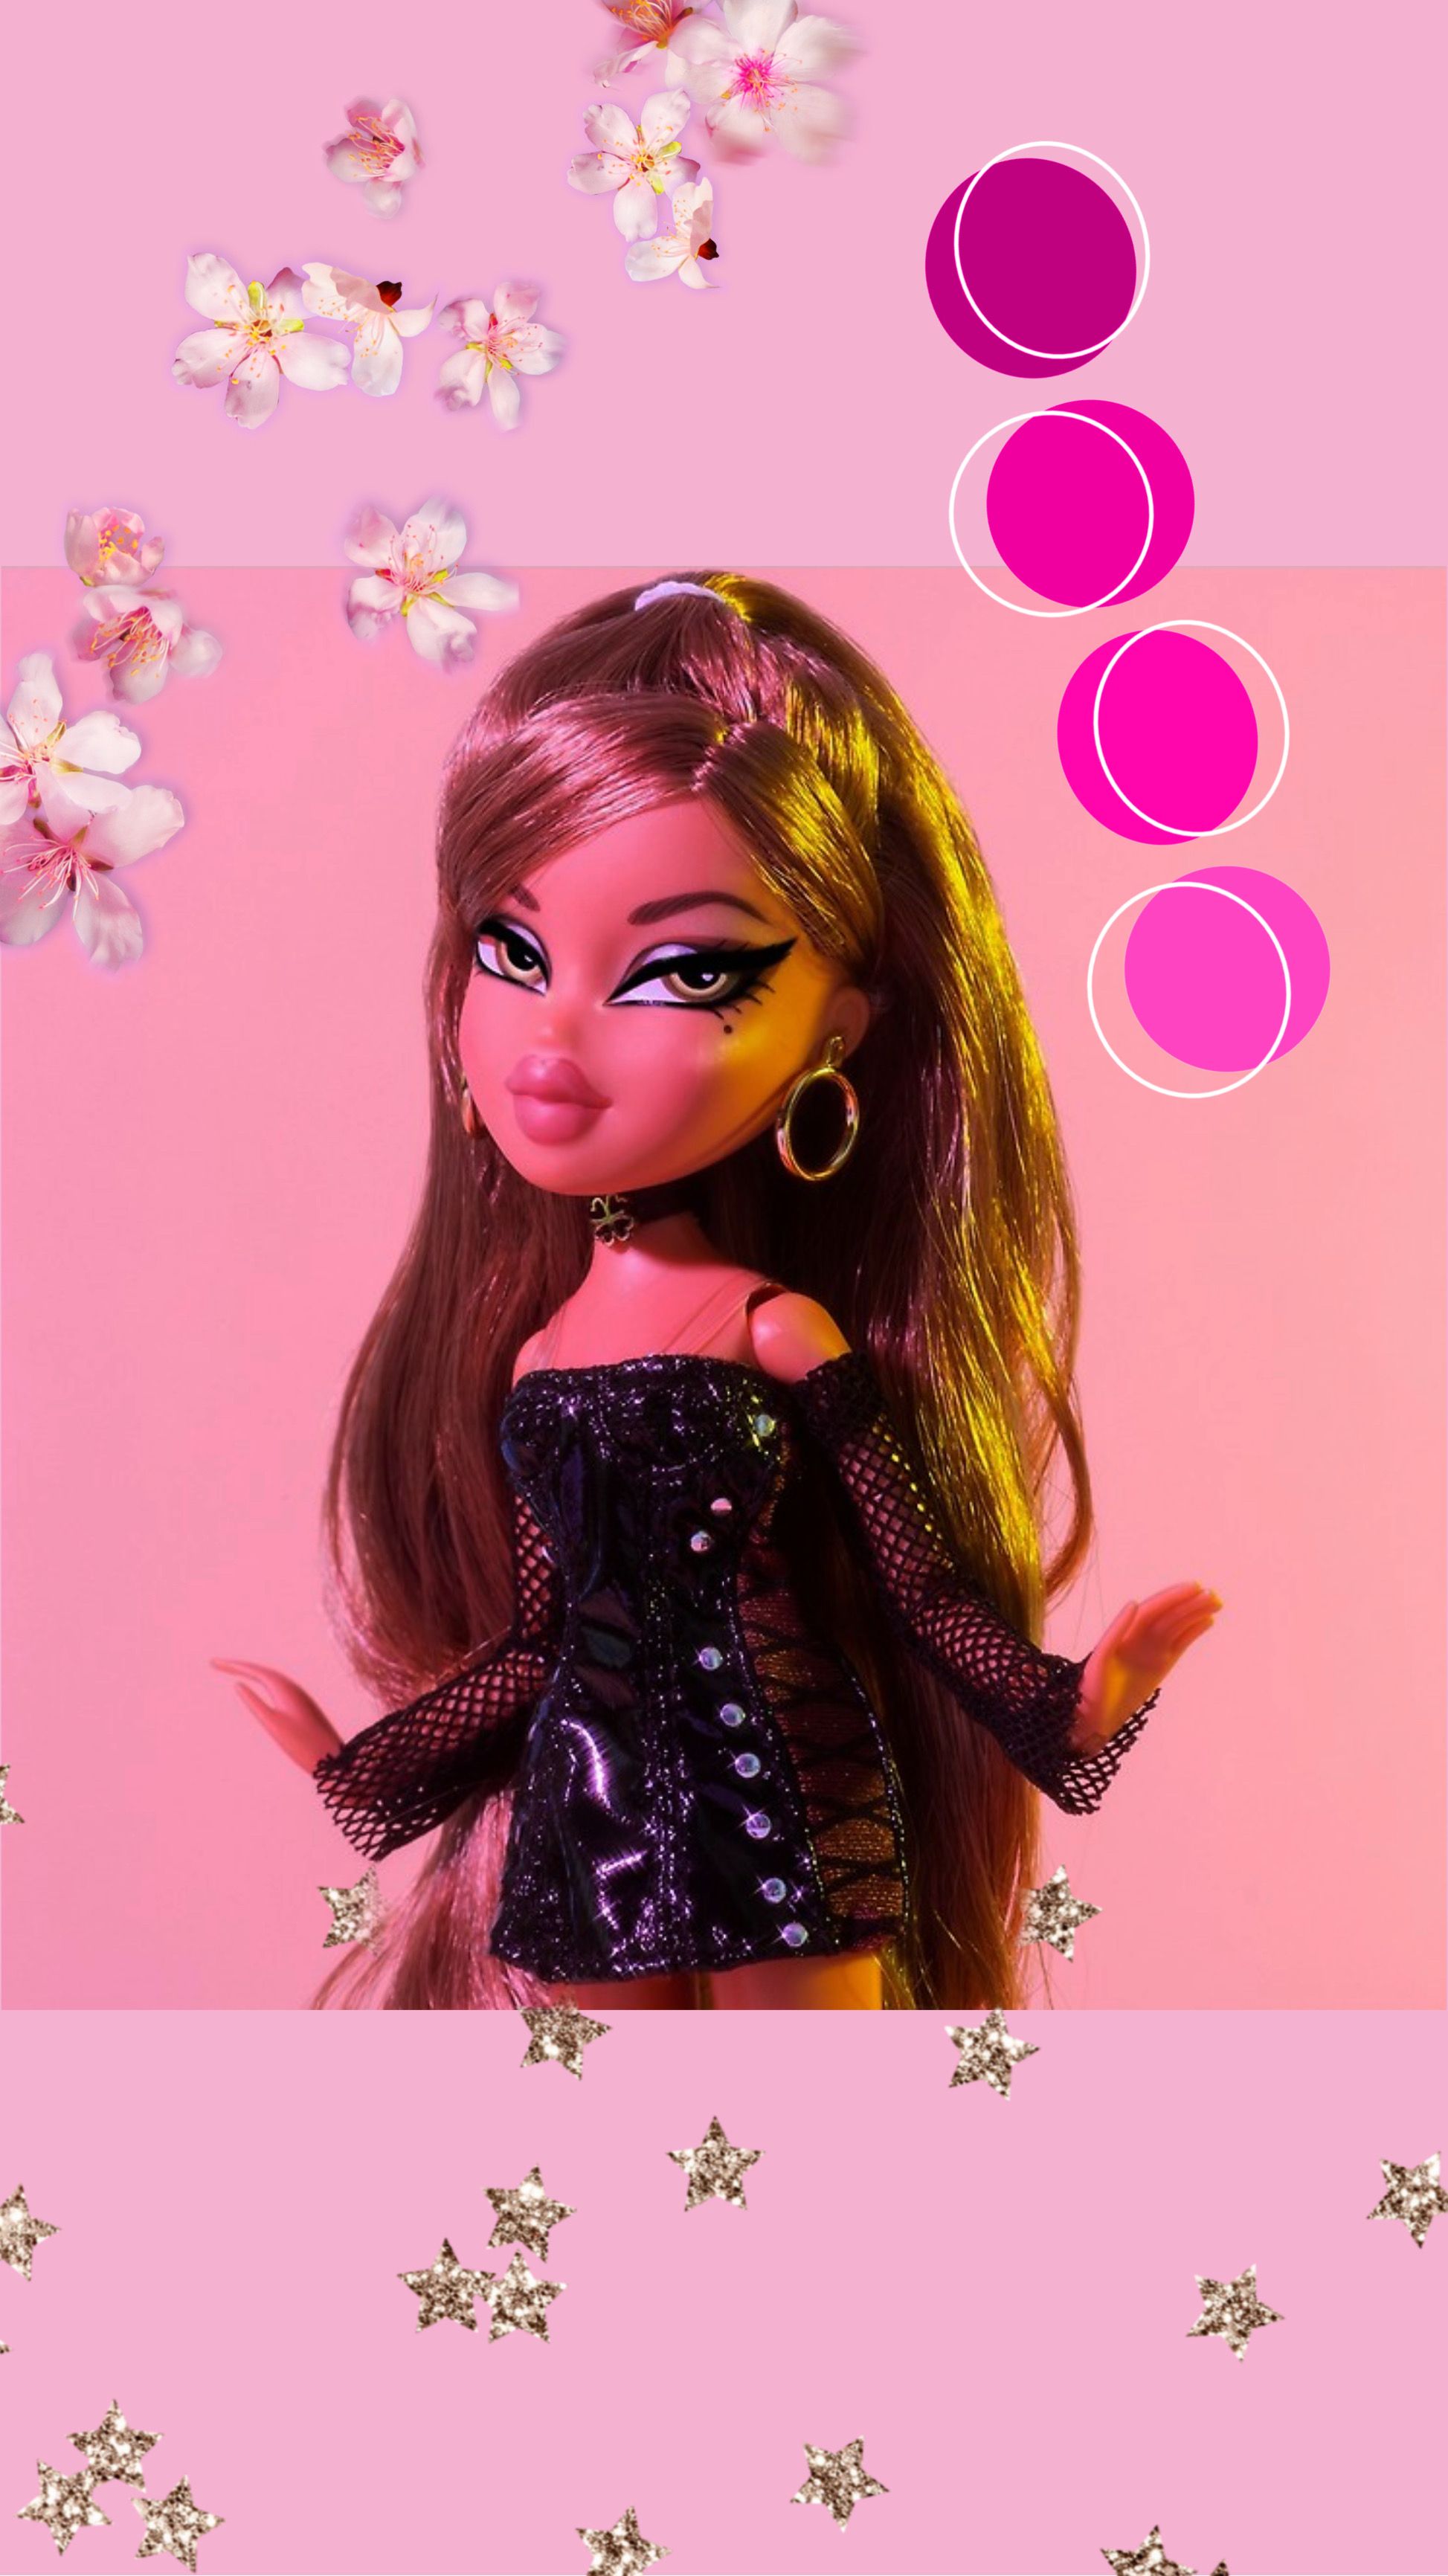 Aesthetic wallpaper for phone of a Bratz doll with flowers and sparkles - Bratz